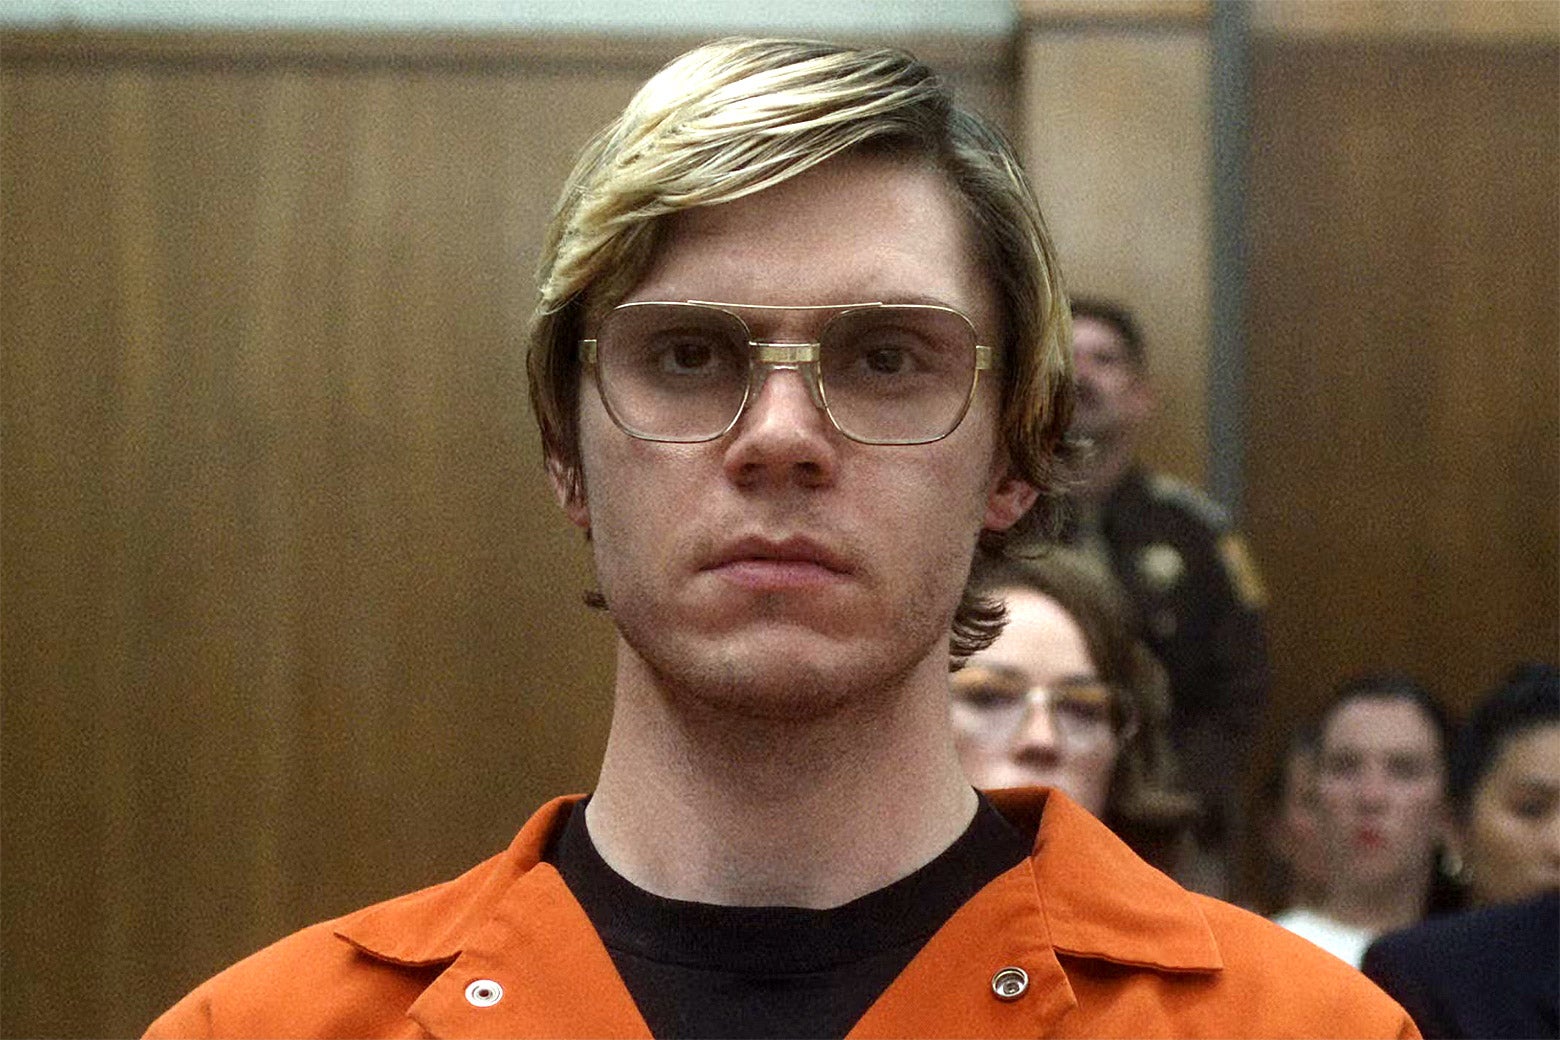 Dahmer: Why the controversial Netflix series is its biggest hit since Squid Game.